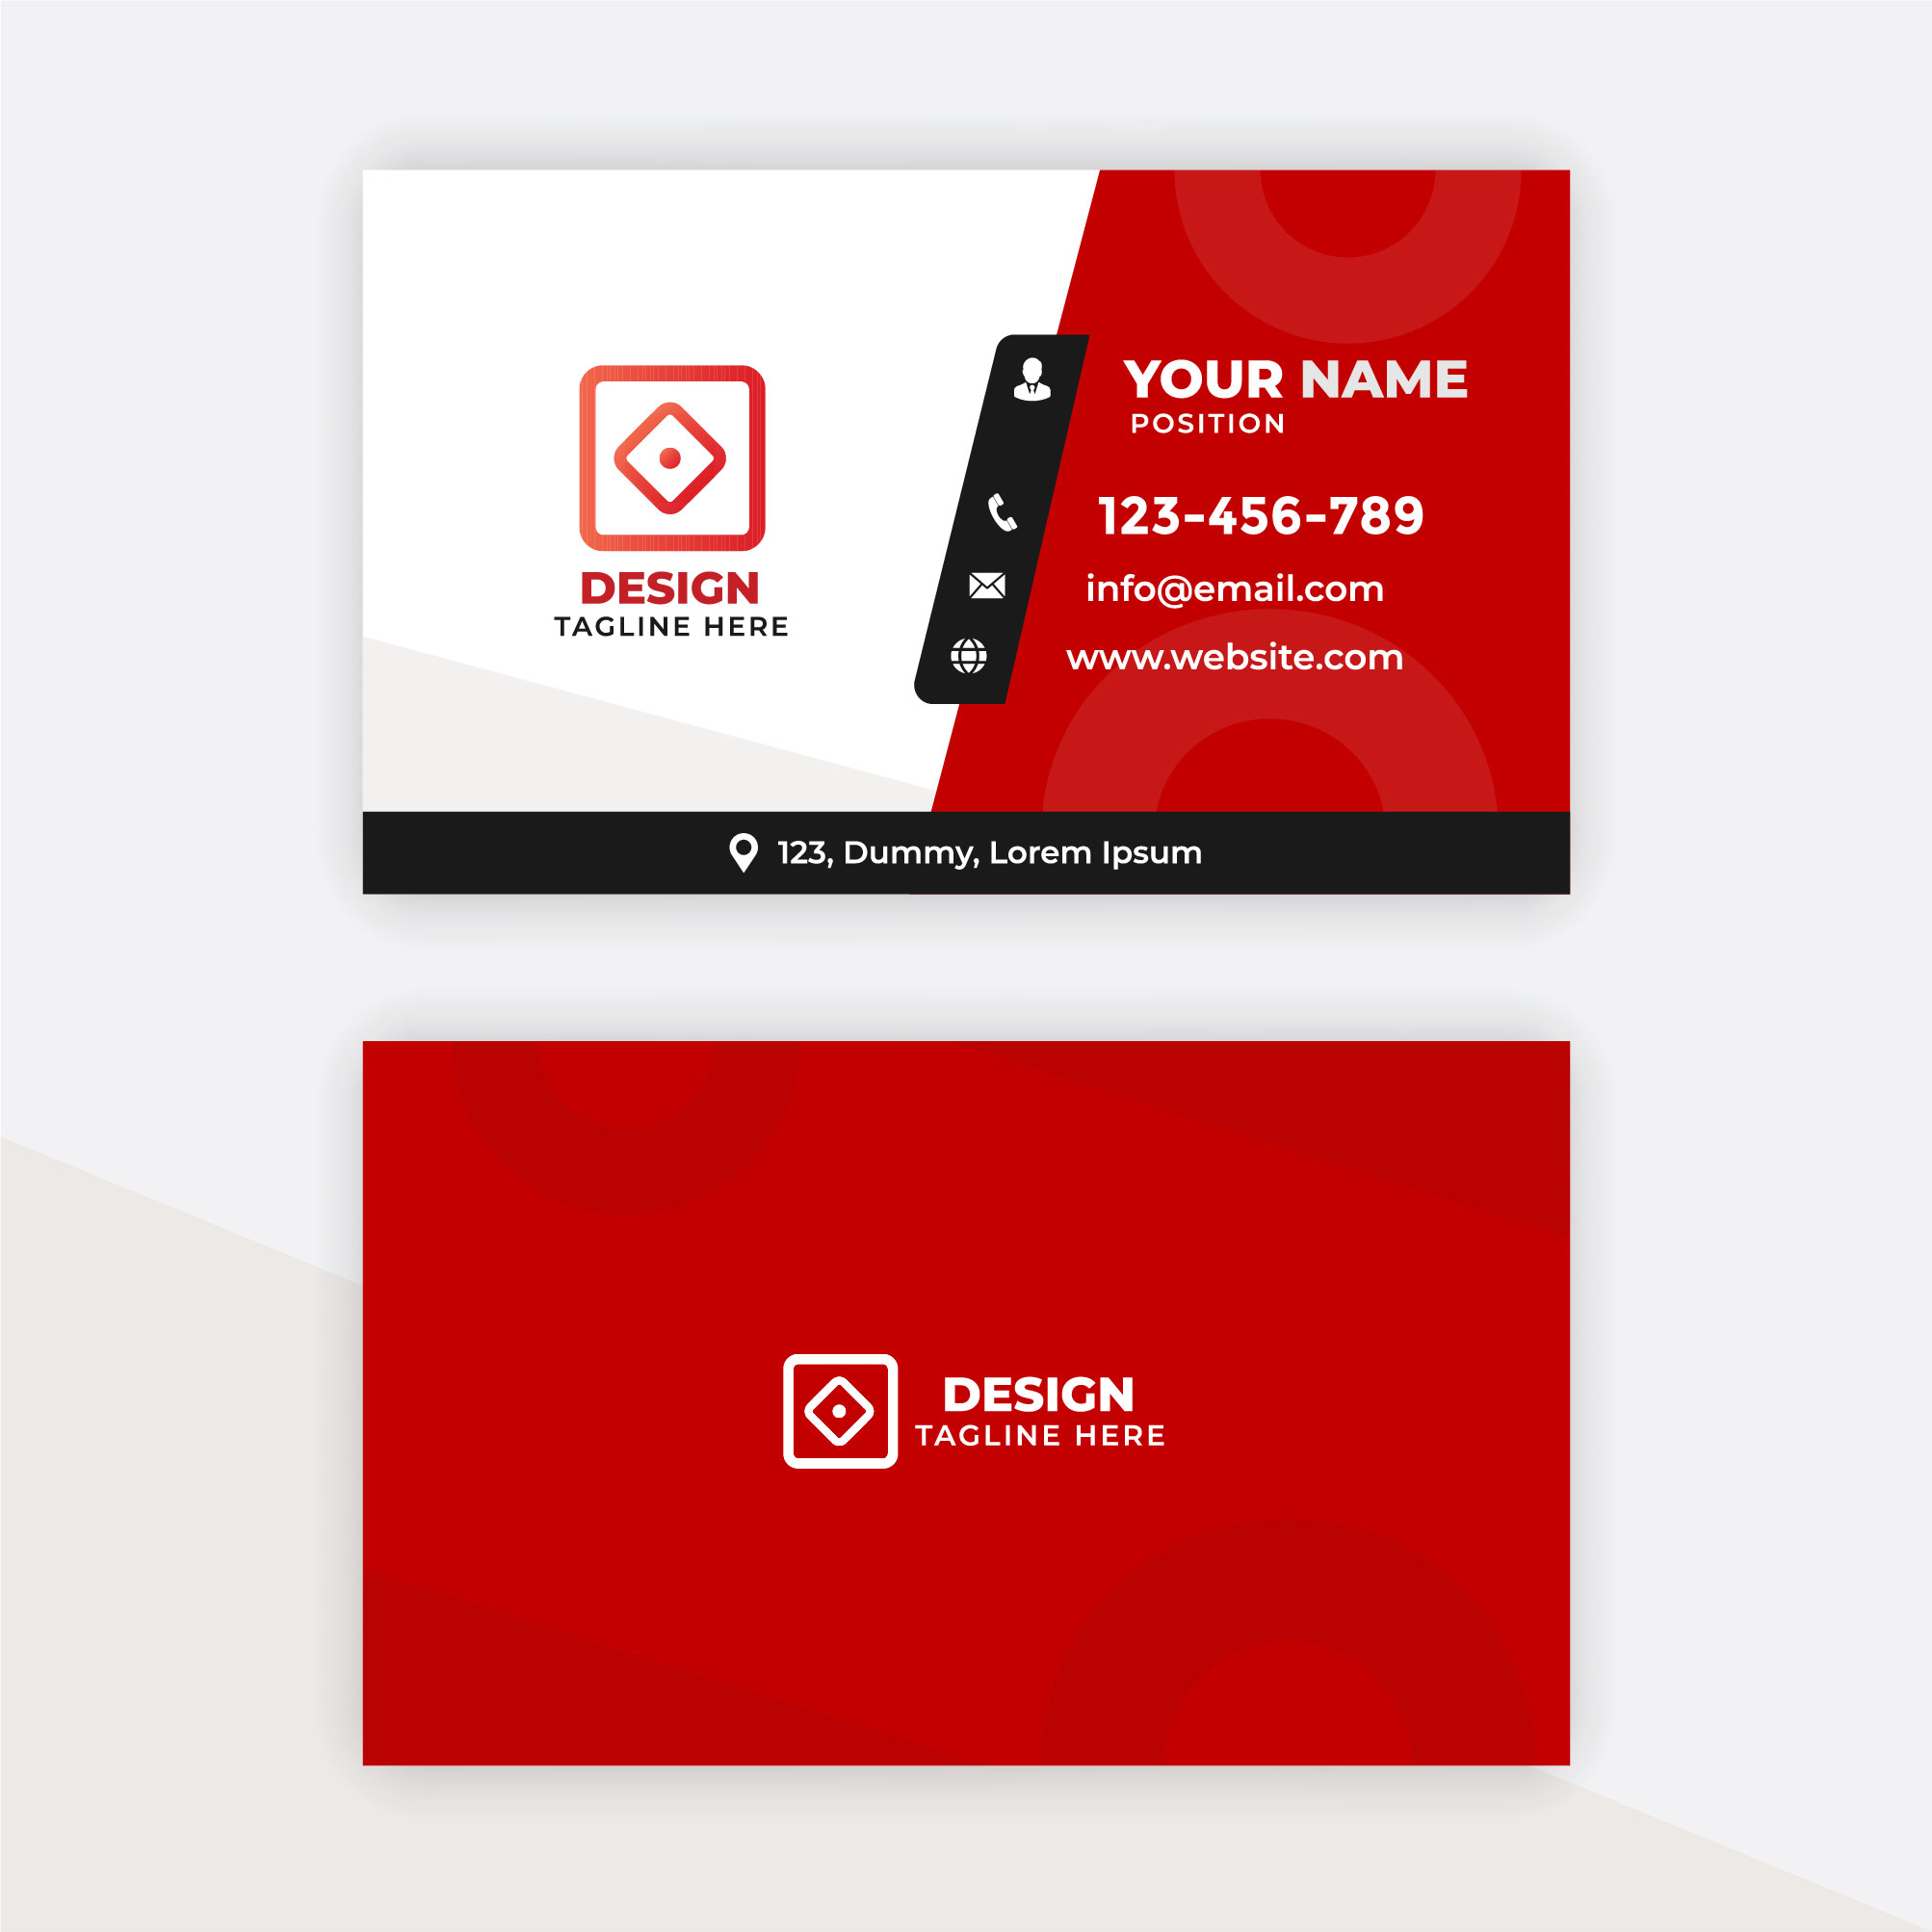 clean and modern style red diagonal shape business card 01 428